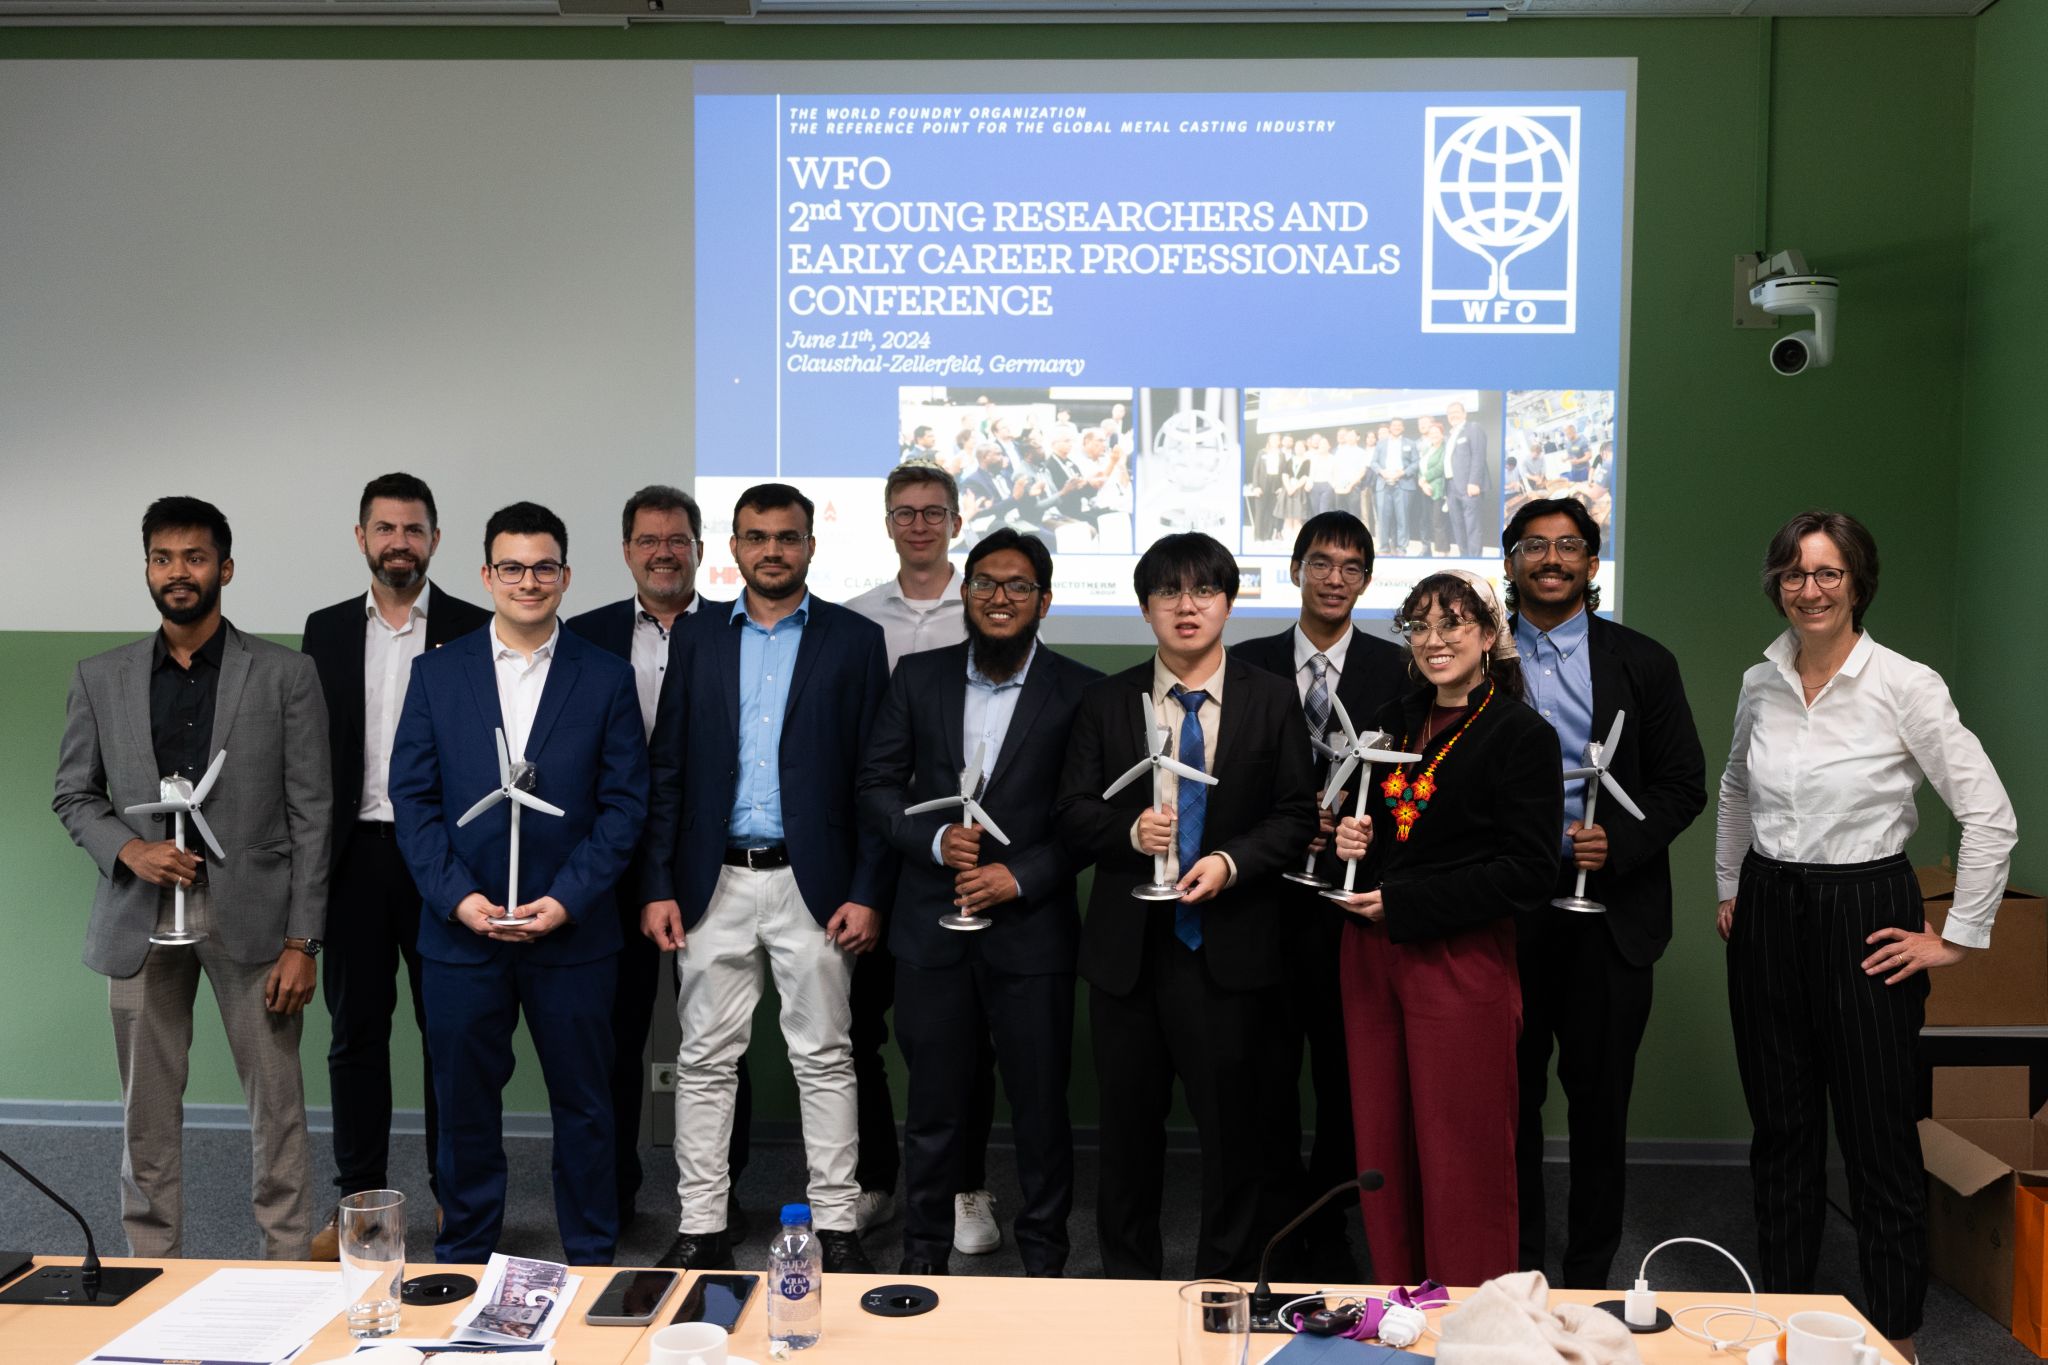 The WFO (World Foundry Organization) announces the 2024 Best Young Foundry Professionals as a result of the final stage of the Young Researchers Conference taking place in Germany: